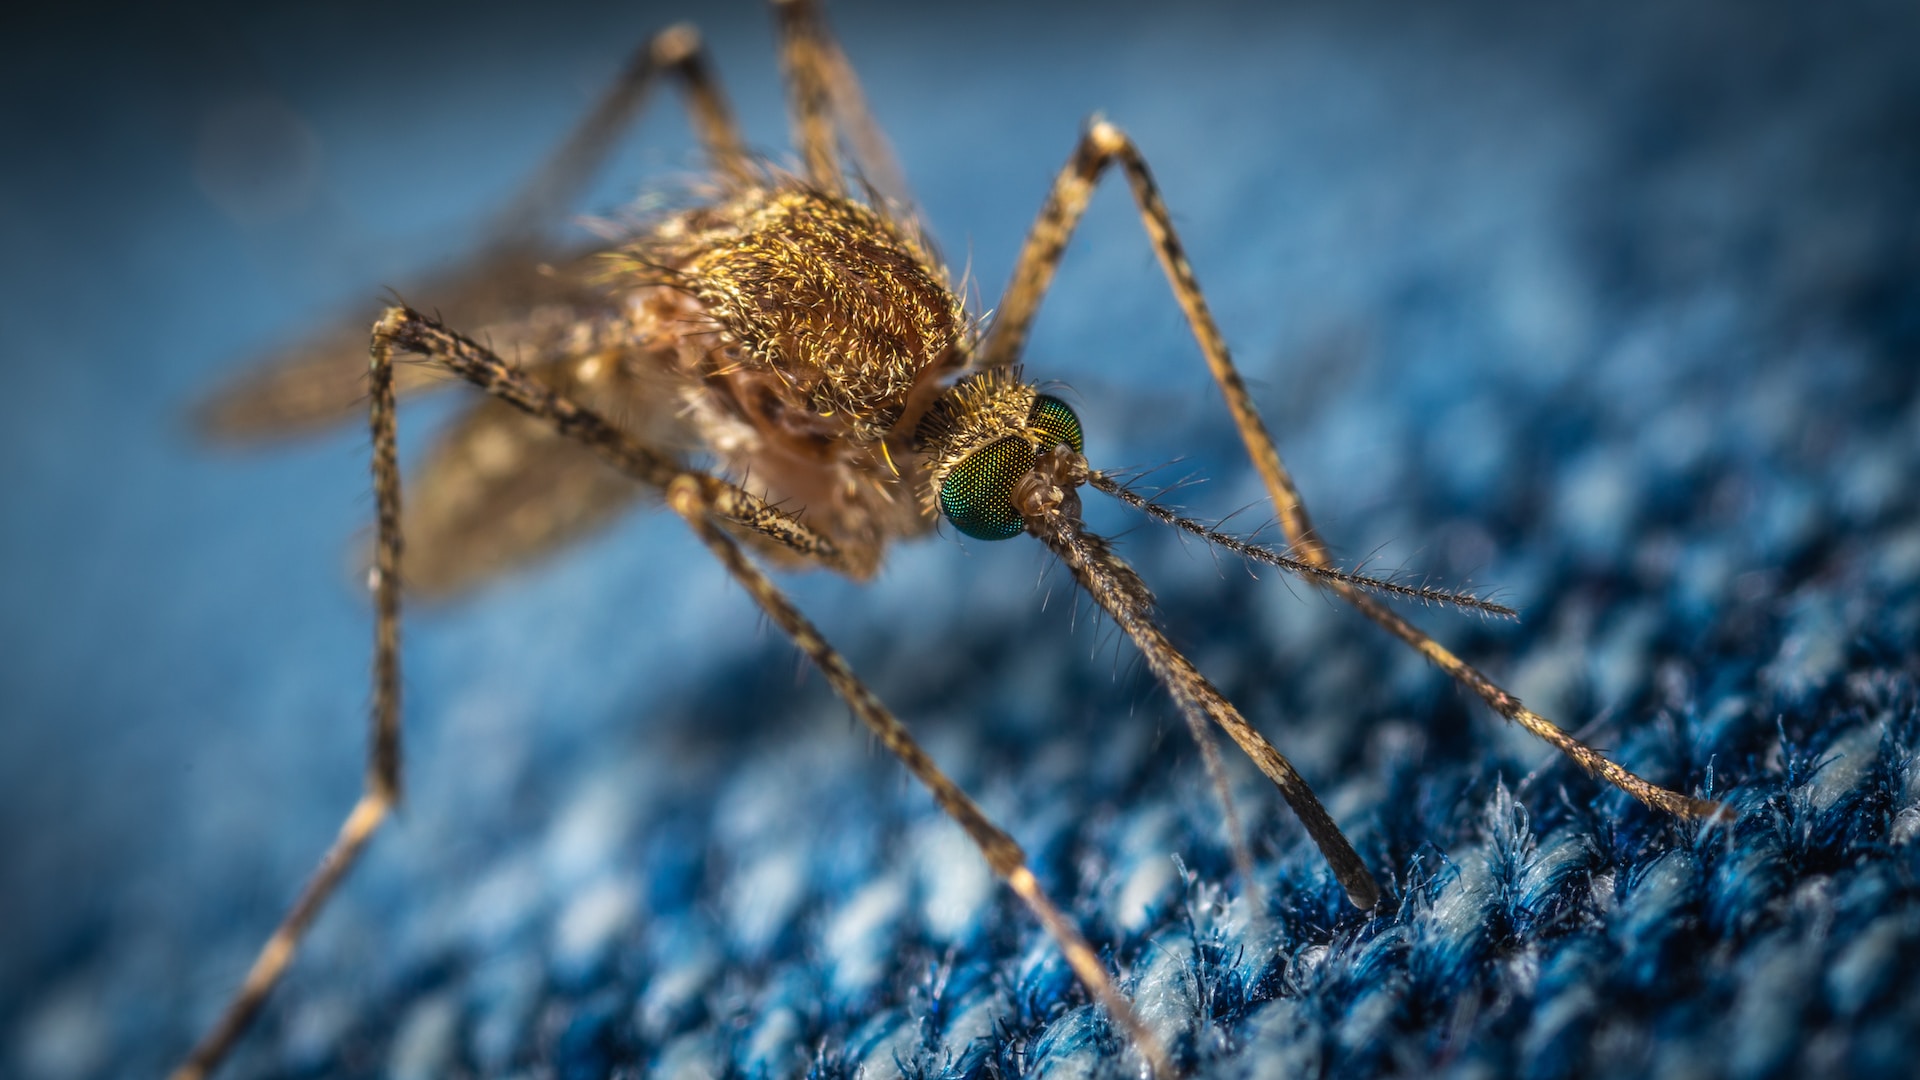 Mosquitoes in Florida: Transmission Vectors of Rare Diseases?